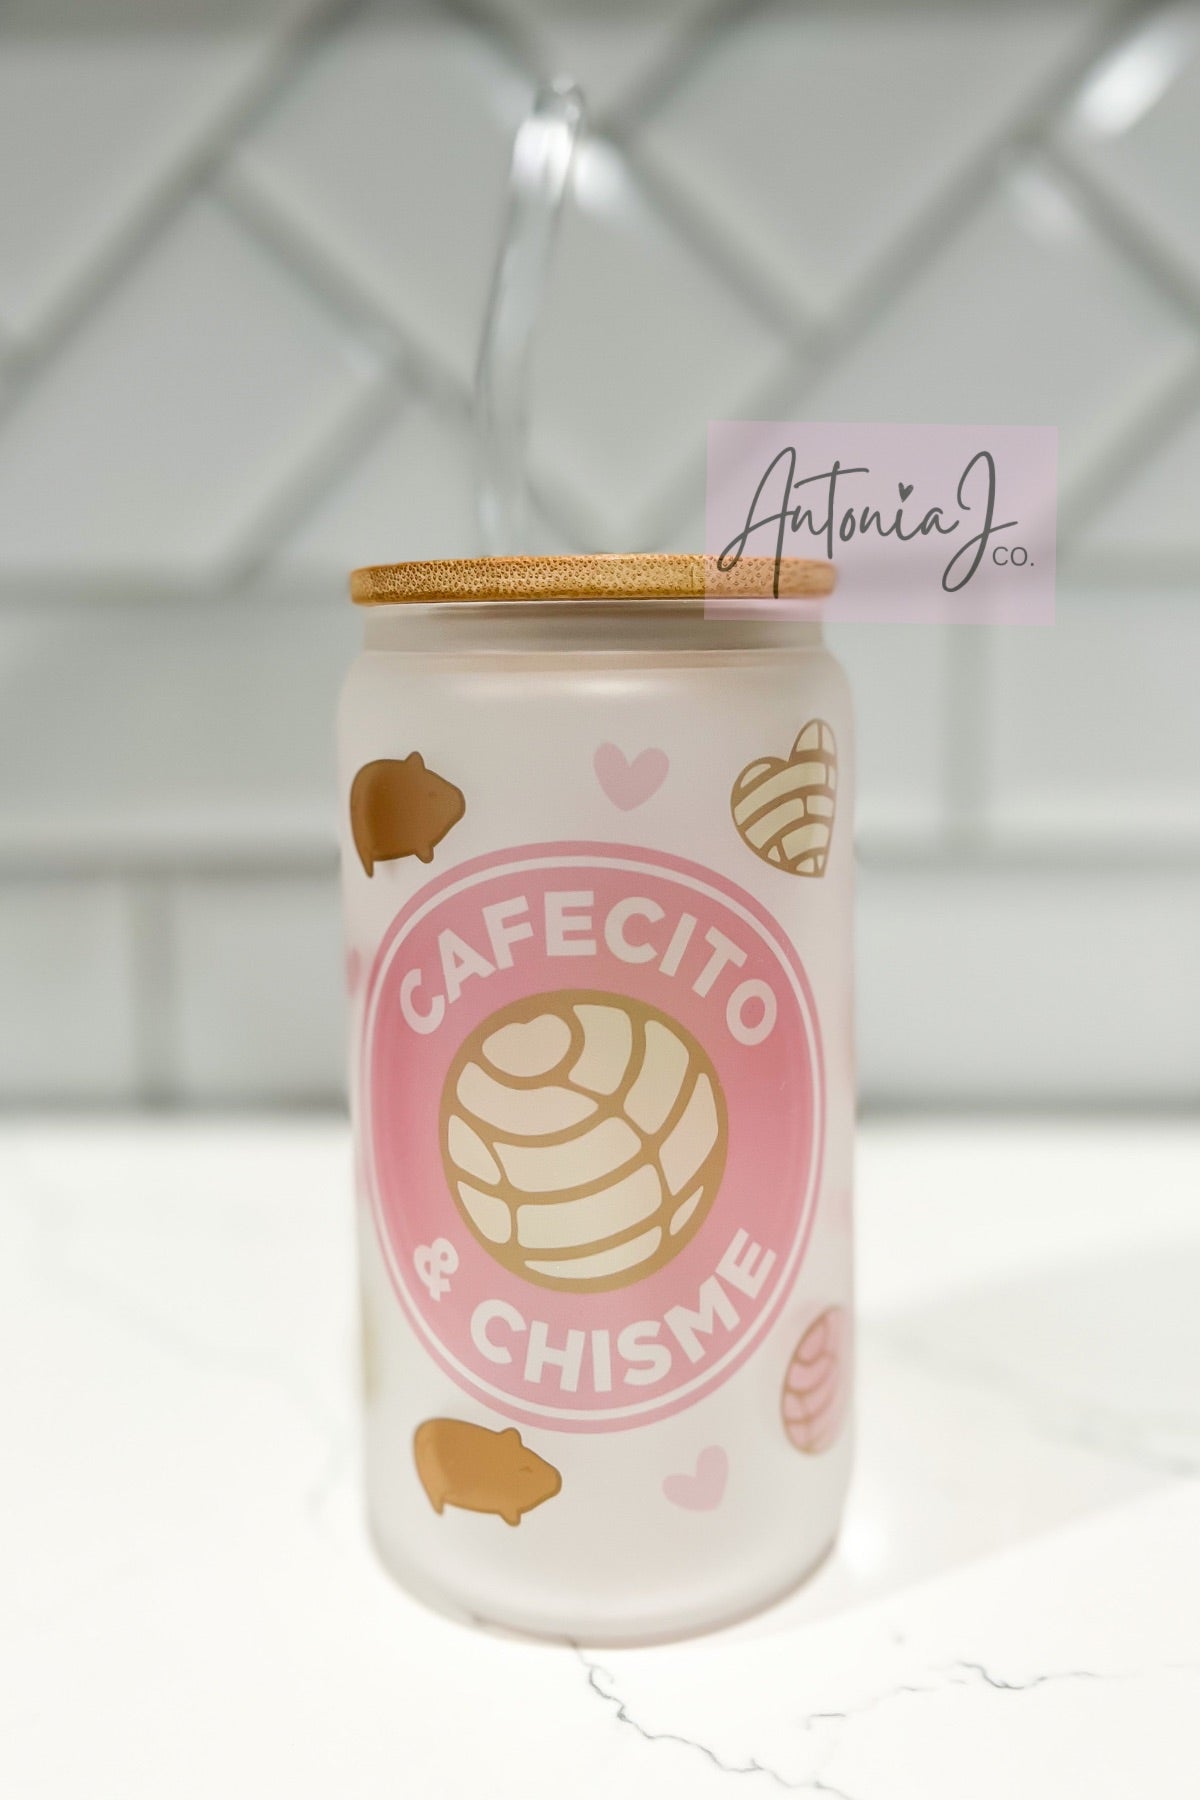 Cafecito Y Chisme Mexican Concha Iced Coffee Cup Beverage Drinks